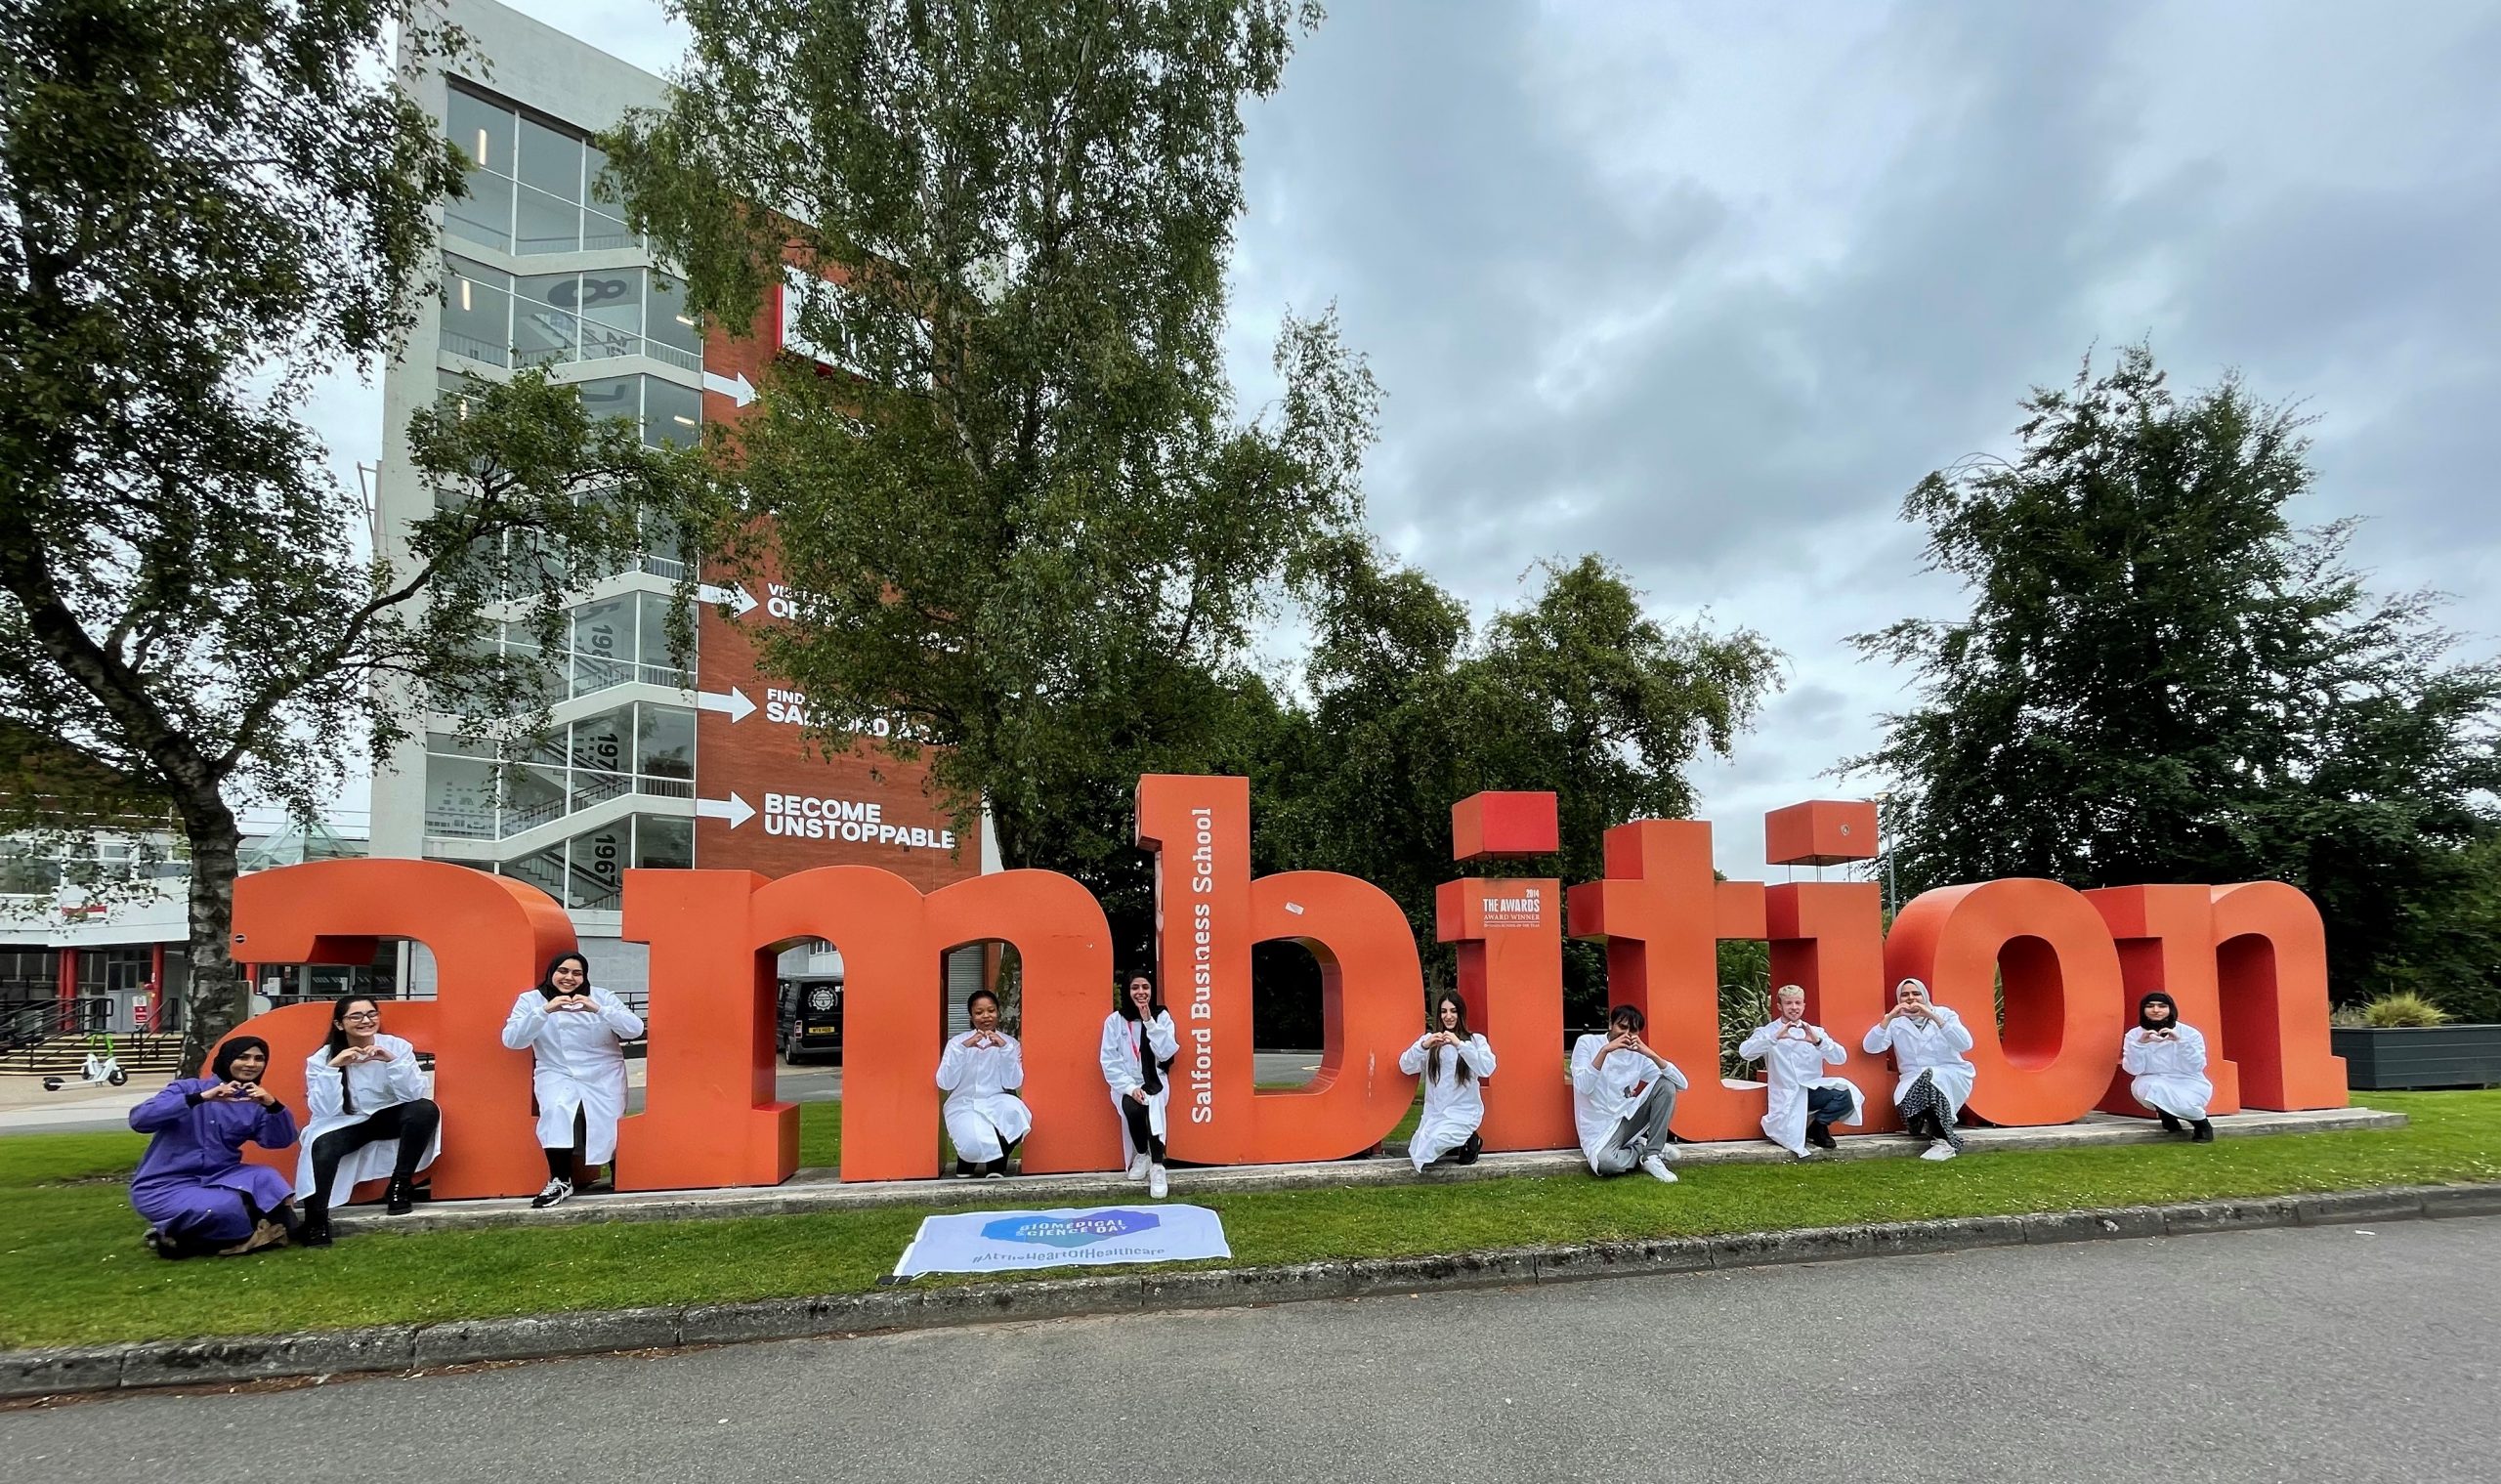 Students in lab coats post next to the 'ambition' sign outside of Salford's Maxwell building